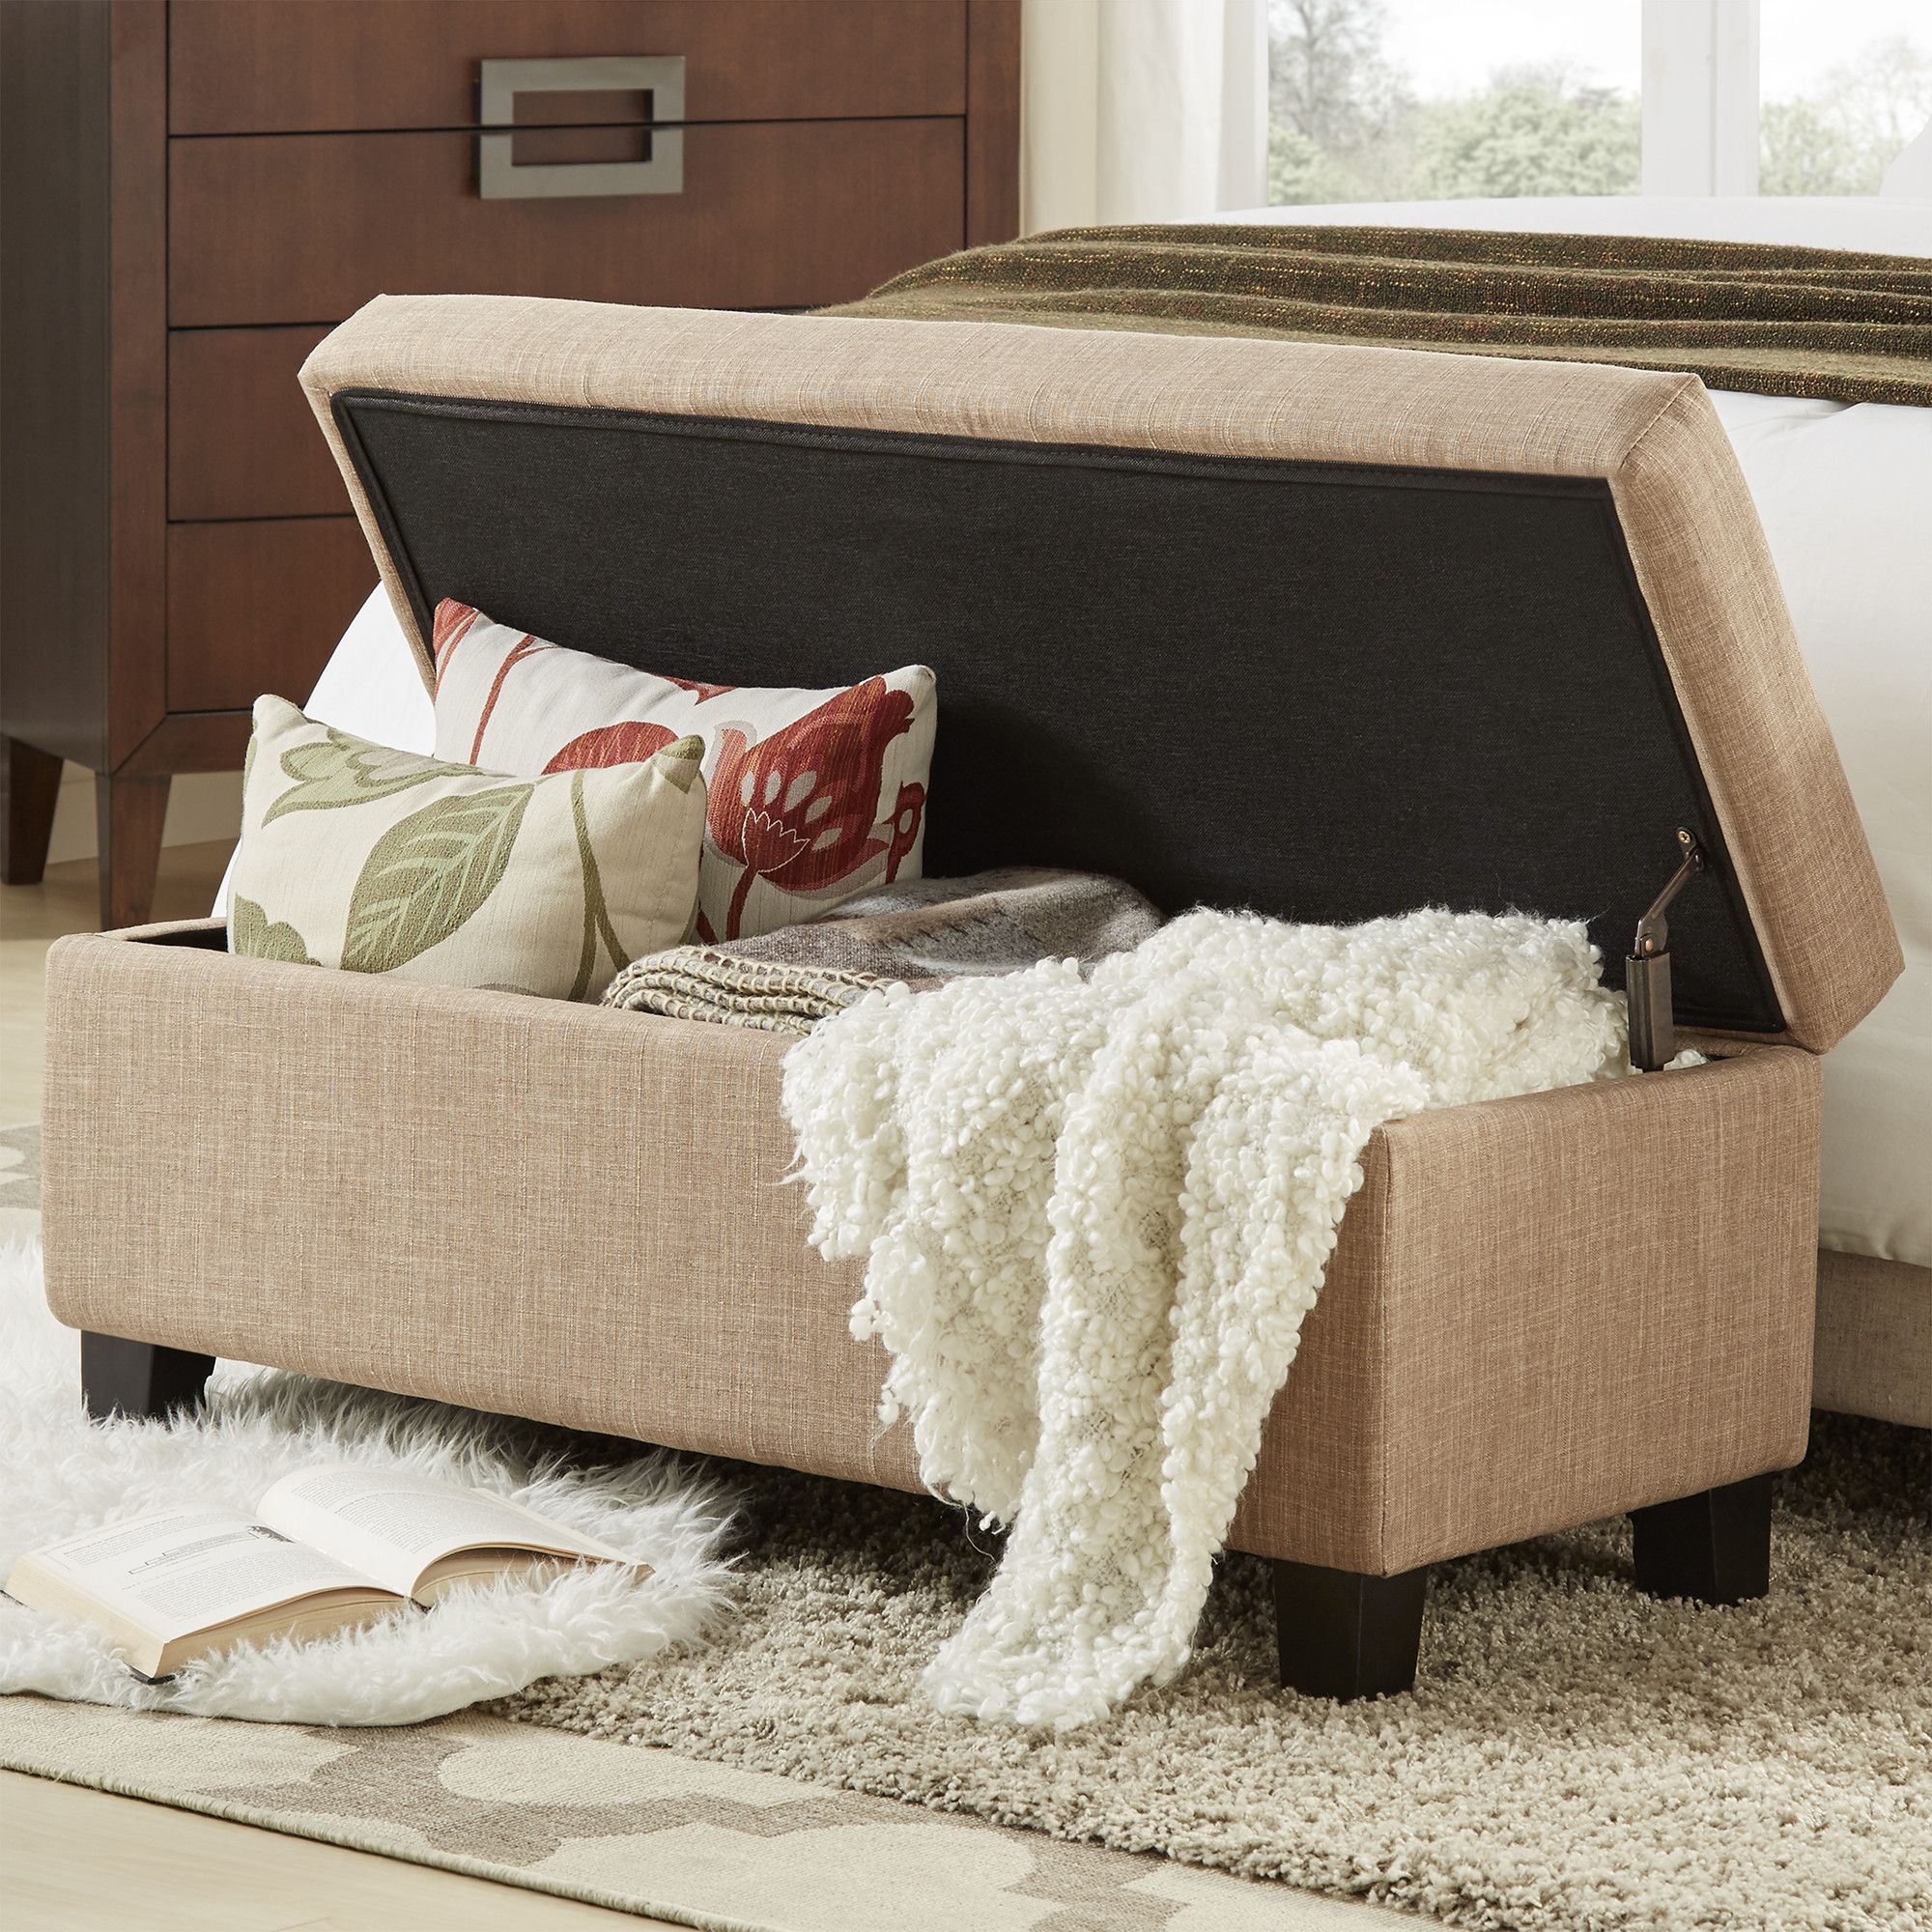 How To Organize Your Bedroom With A Storage Bench